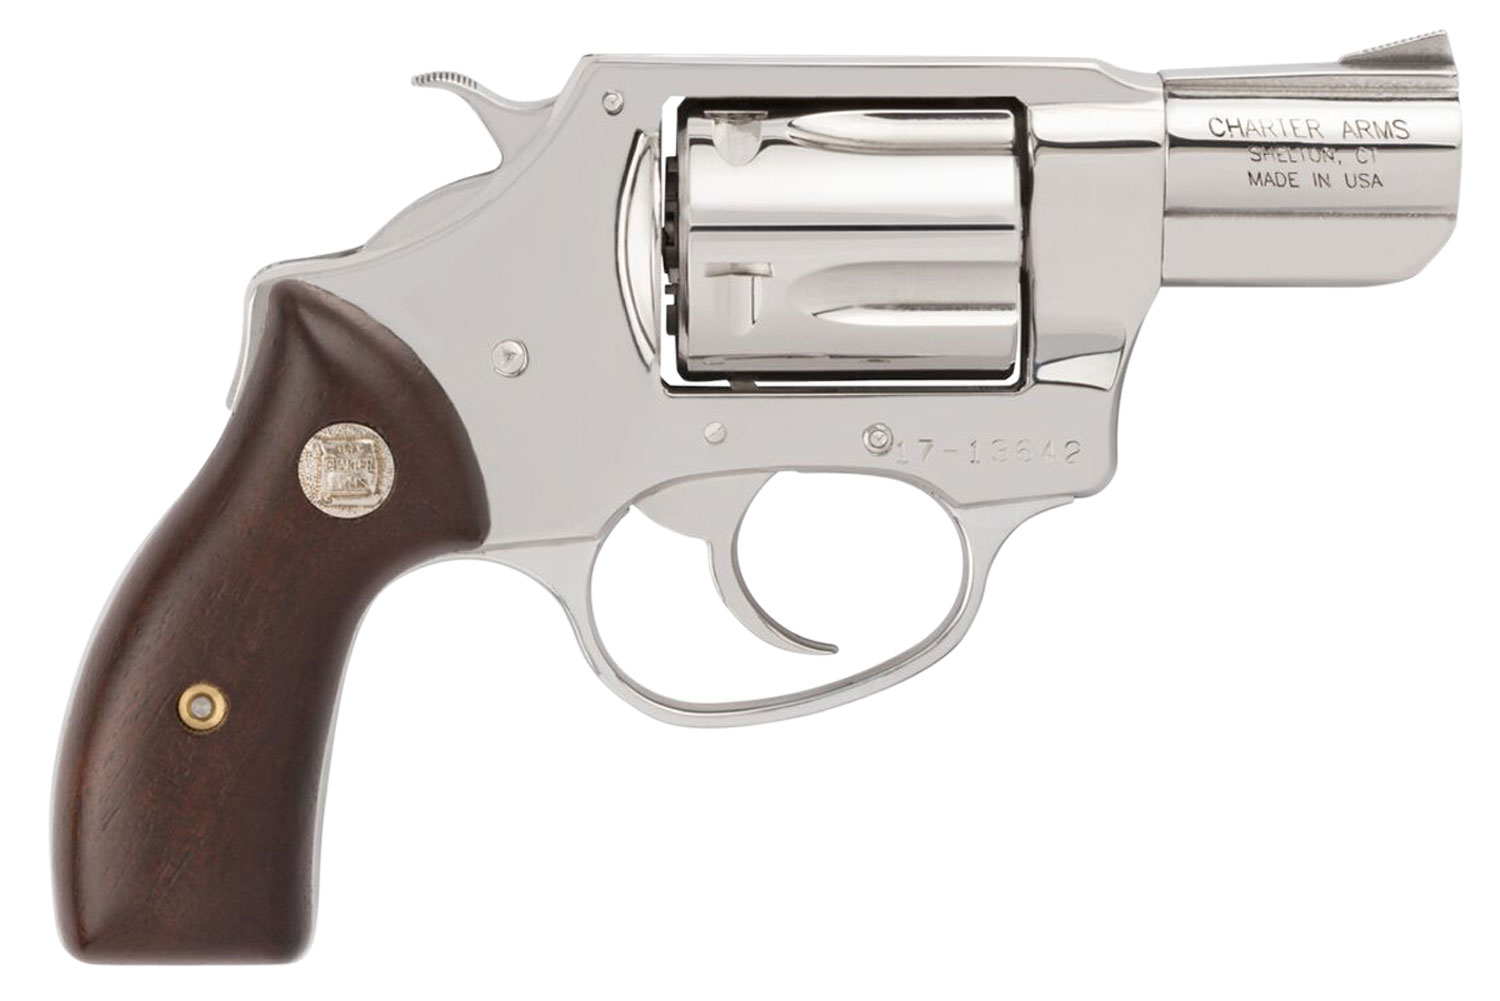 CHARTER ARMS 73829 UNDERCOVER       38 2.0 POL/WOOD   5SHOT